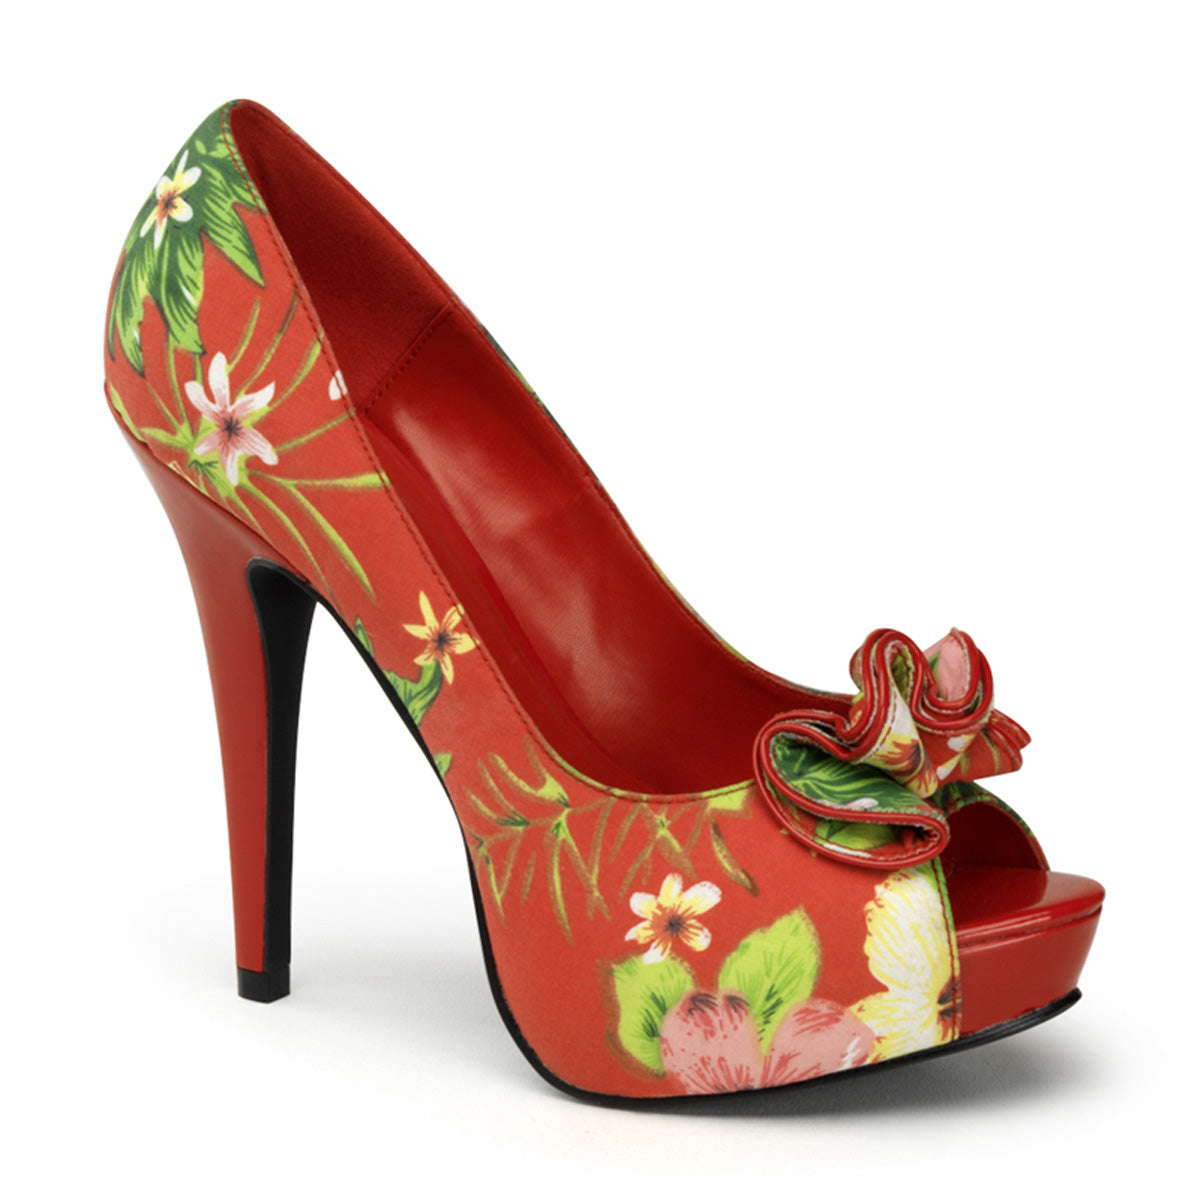 LOLITA-11 Pin Up 5" Heel Red Floral Retro Pin Up Shoes-Pin Up Couture- Sexy Shoes